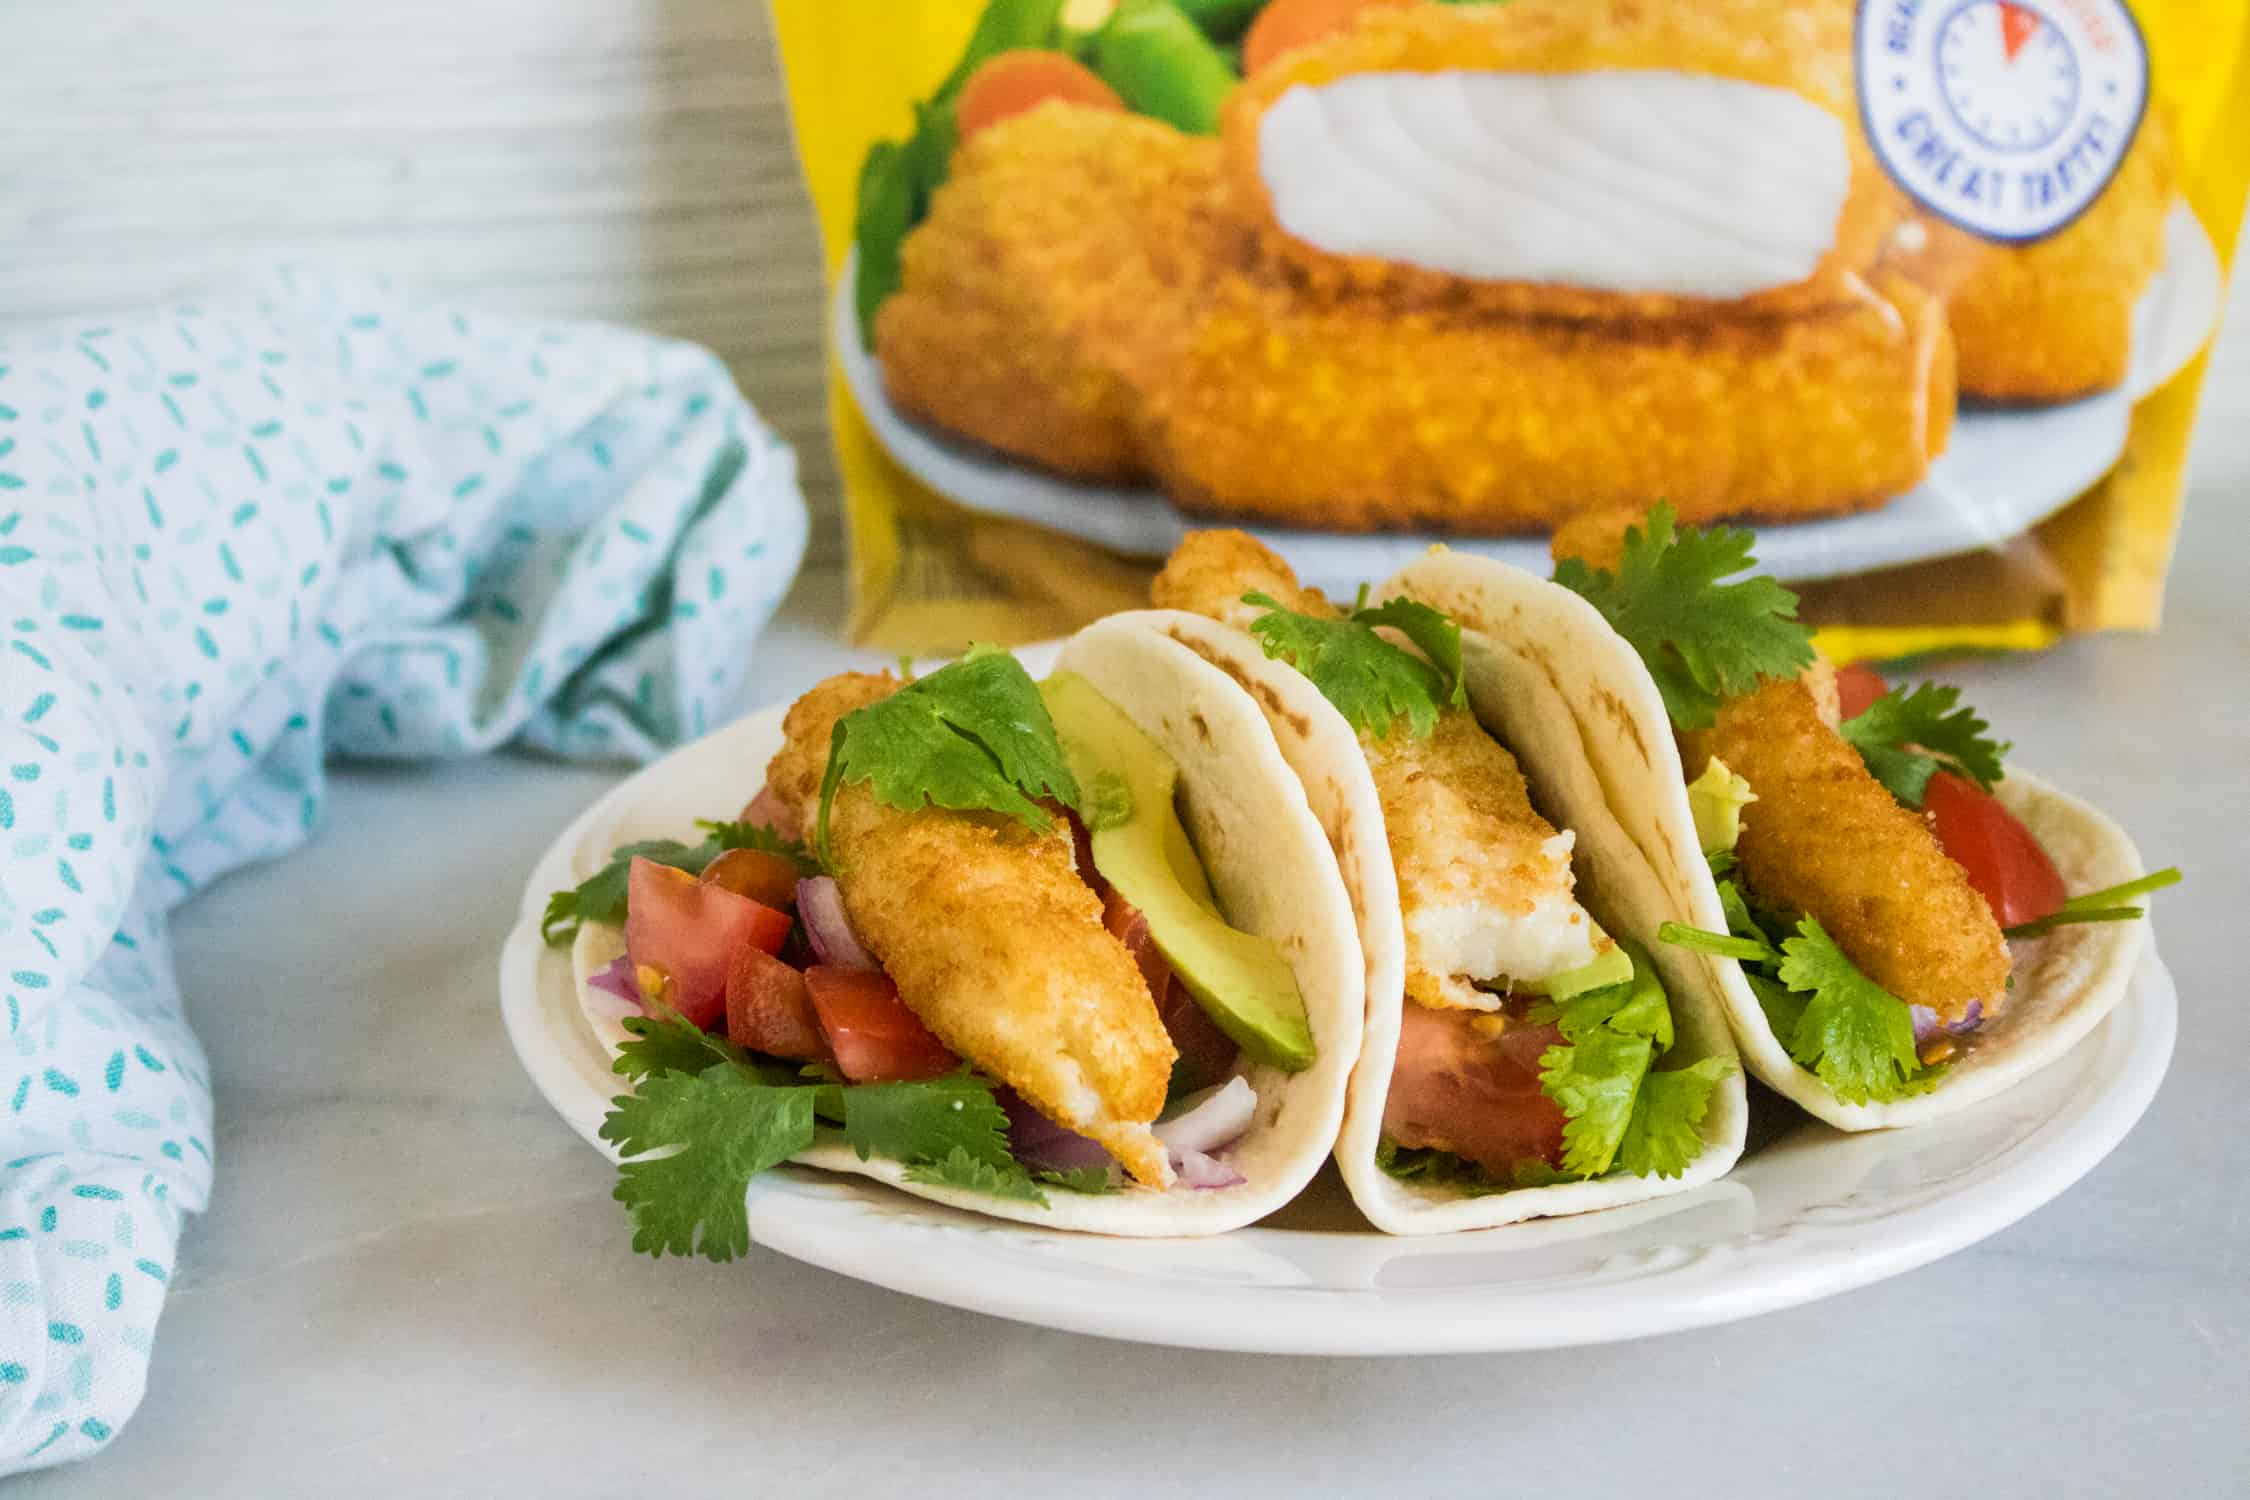 three crunchy fish tacos served on a white plate sitting in front of a bag of Gorton's Crunchy Breaded Fish Fillets